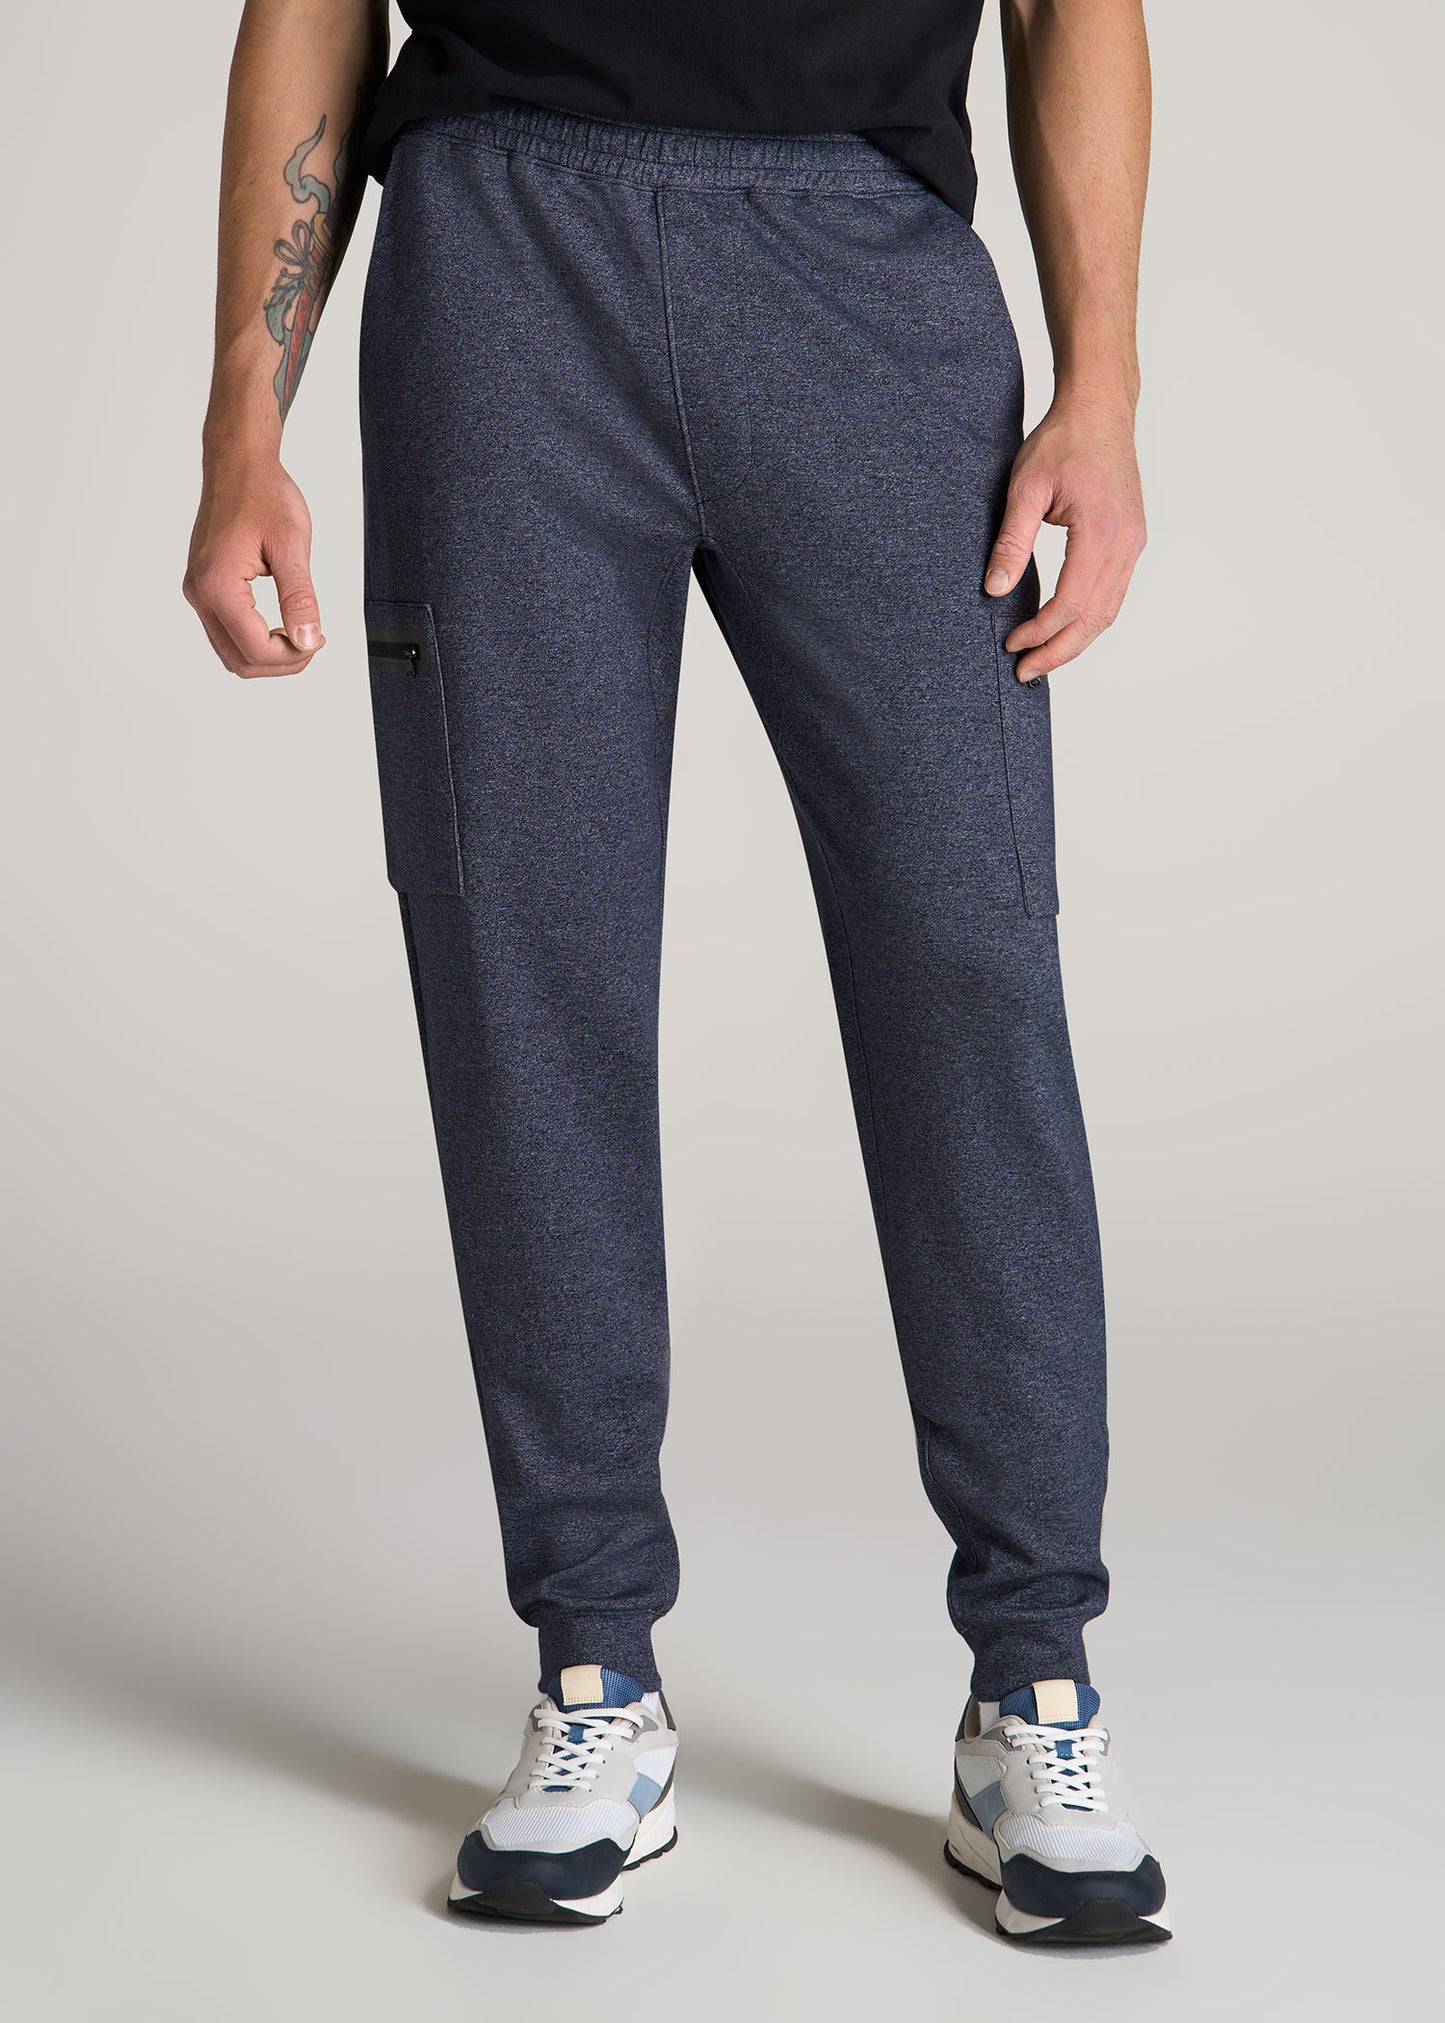 9 Stylish Ways to Wear Men's Sweatpants - Fashionably Male  Mens joggers  outfit, Pants outfit men, Jogger pants outfit